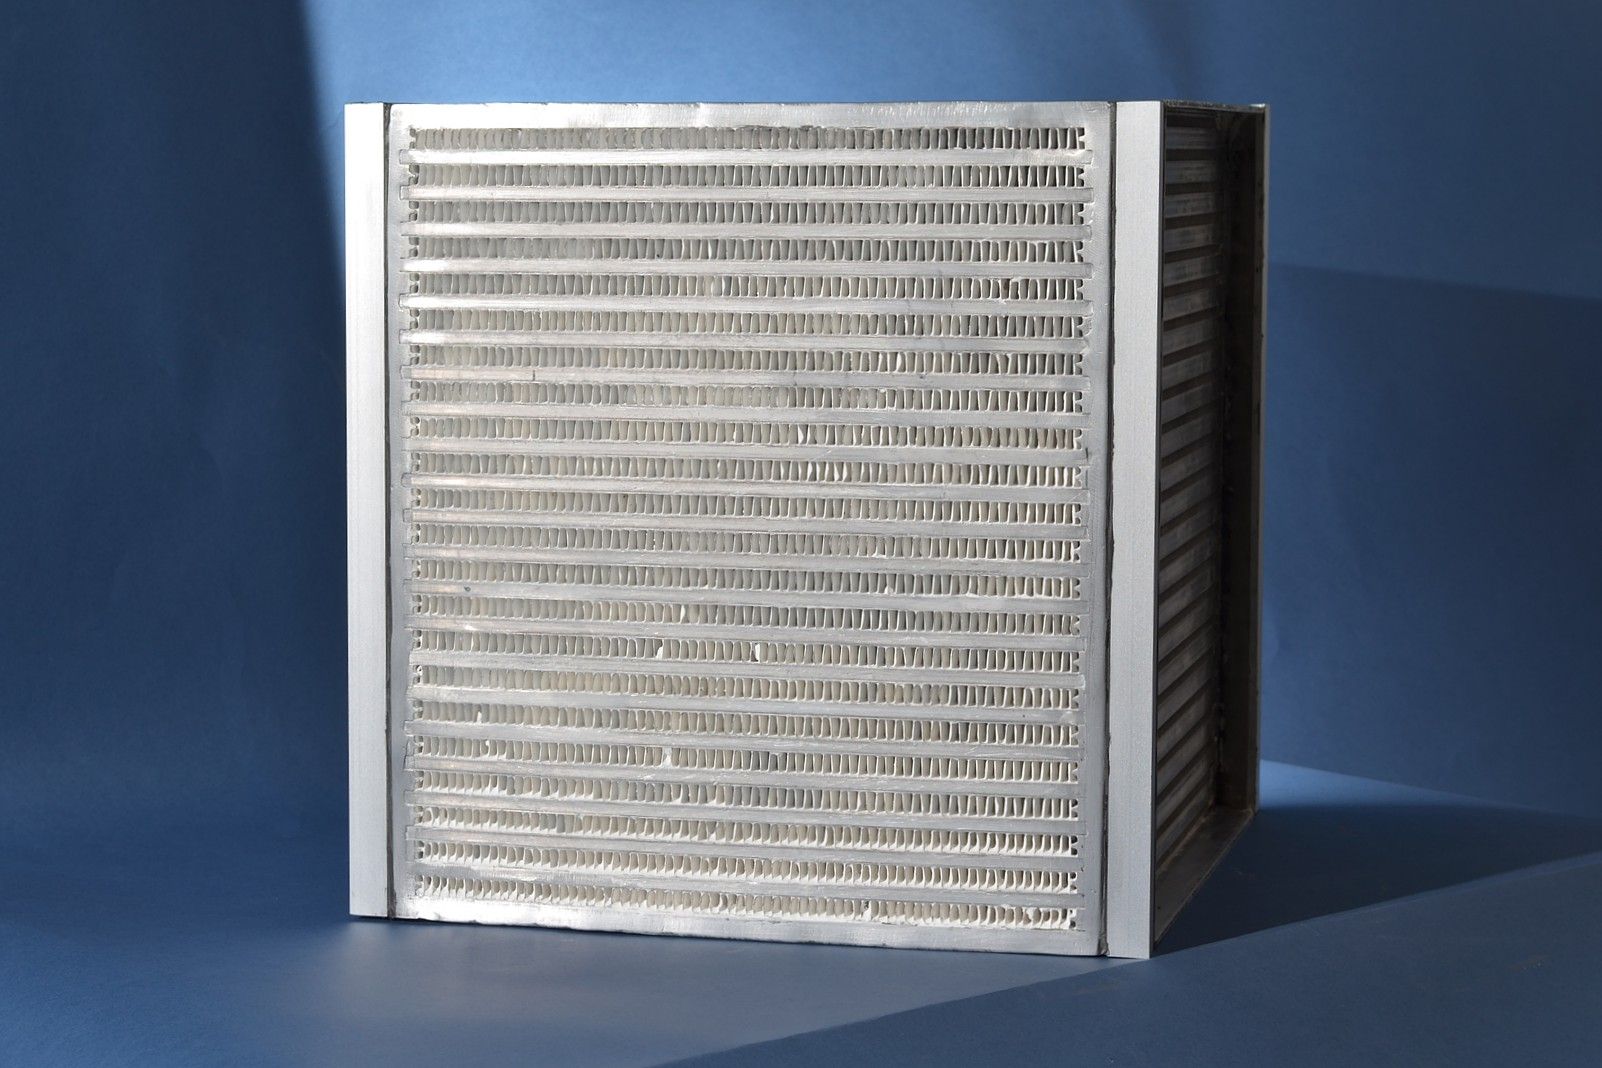 Industrial sized air-to-air heat exchanger with a binder-based coating using a zeolite-type material for the air-conditioning of buildings. 